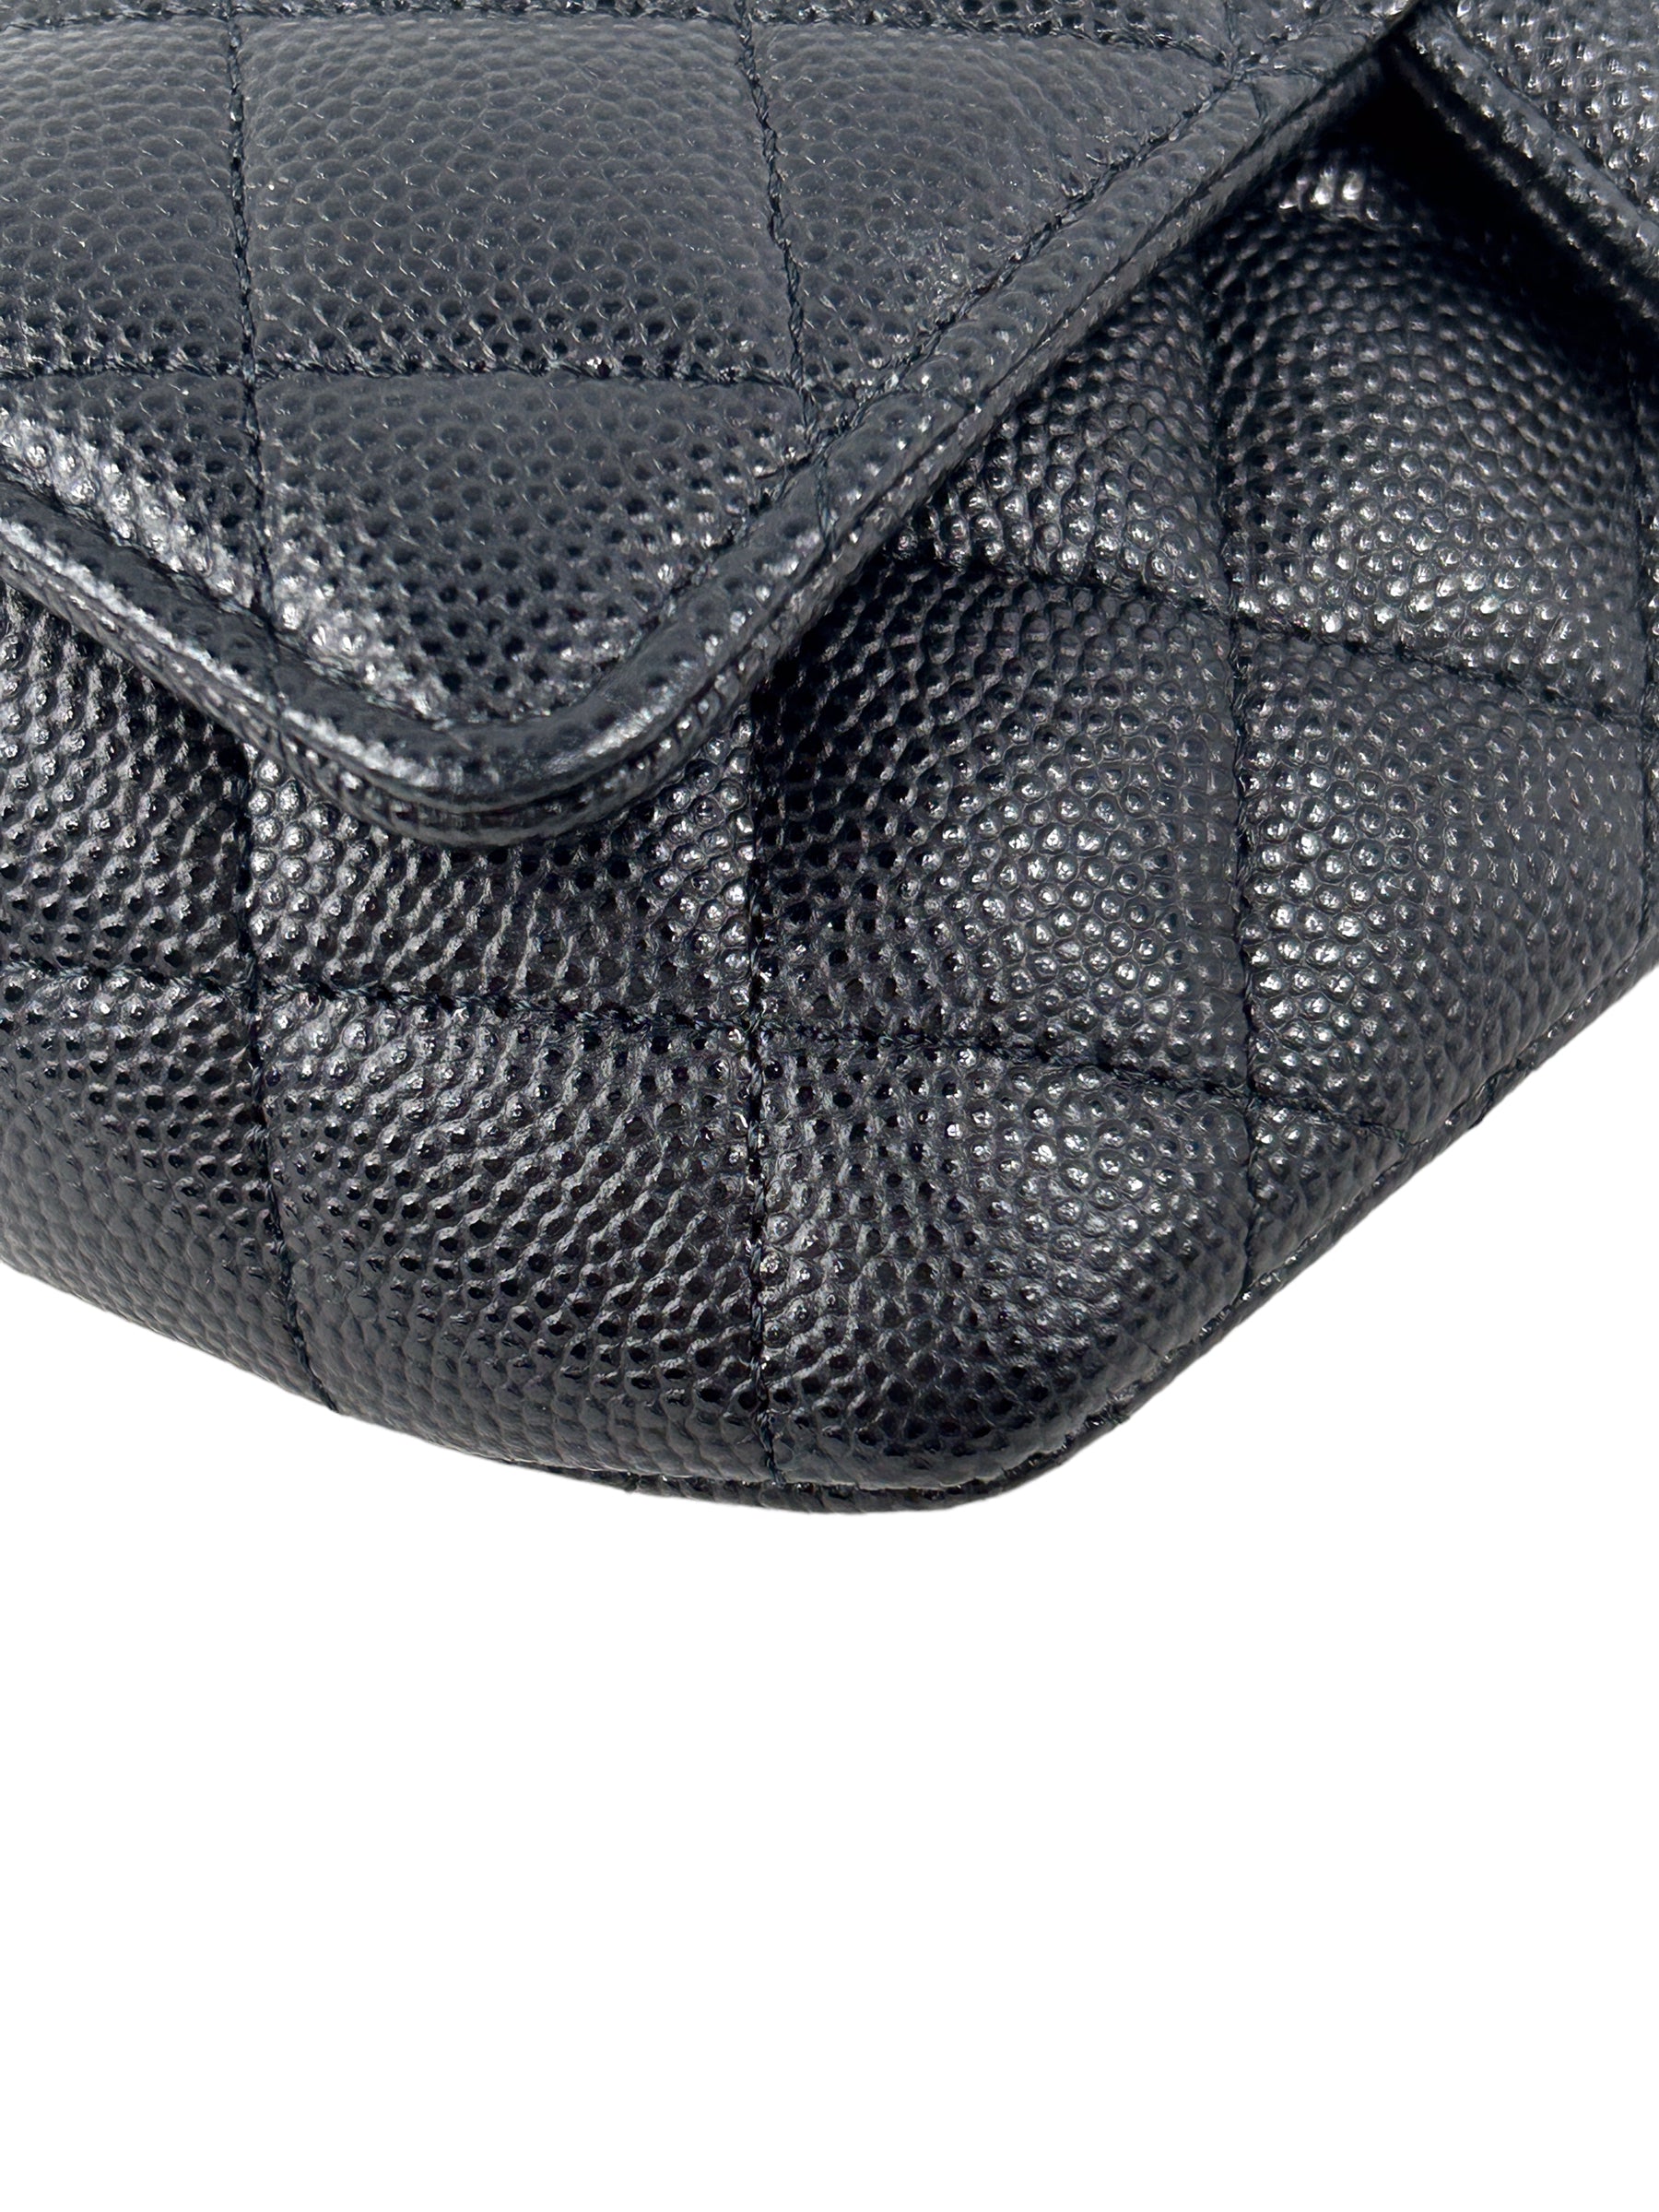 Black Caviar Quilted Sunglass Case Bag w/GHW Chain